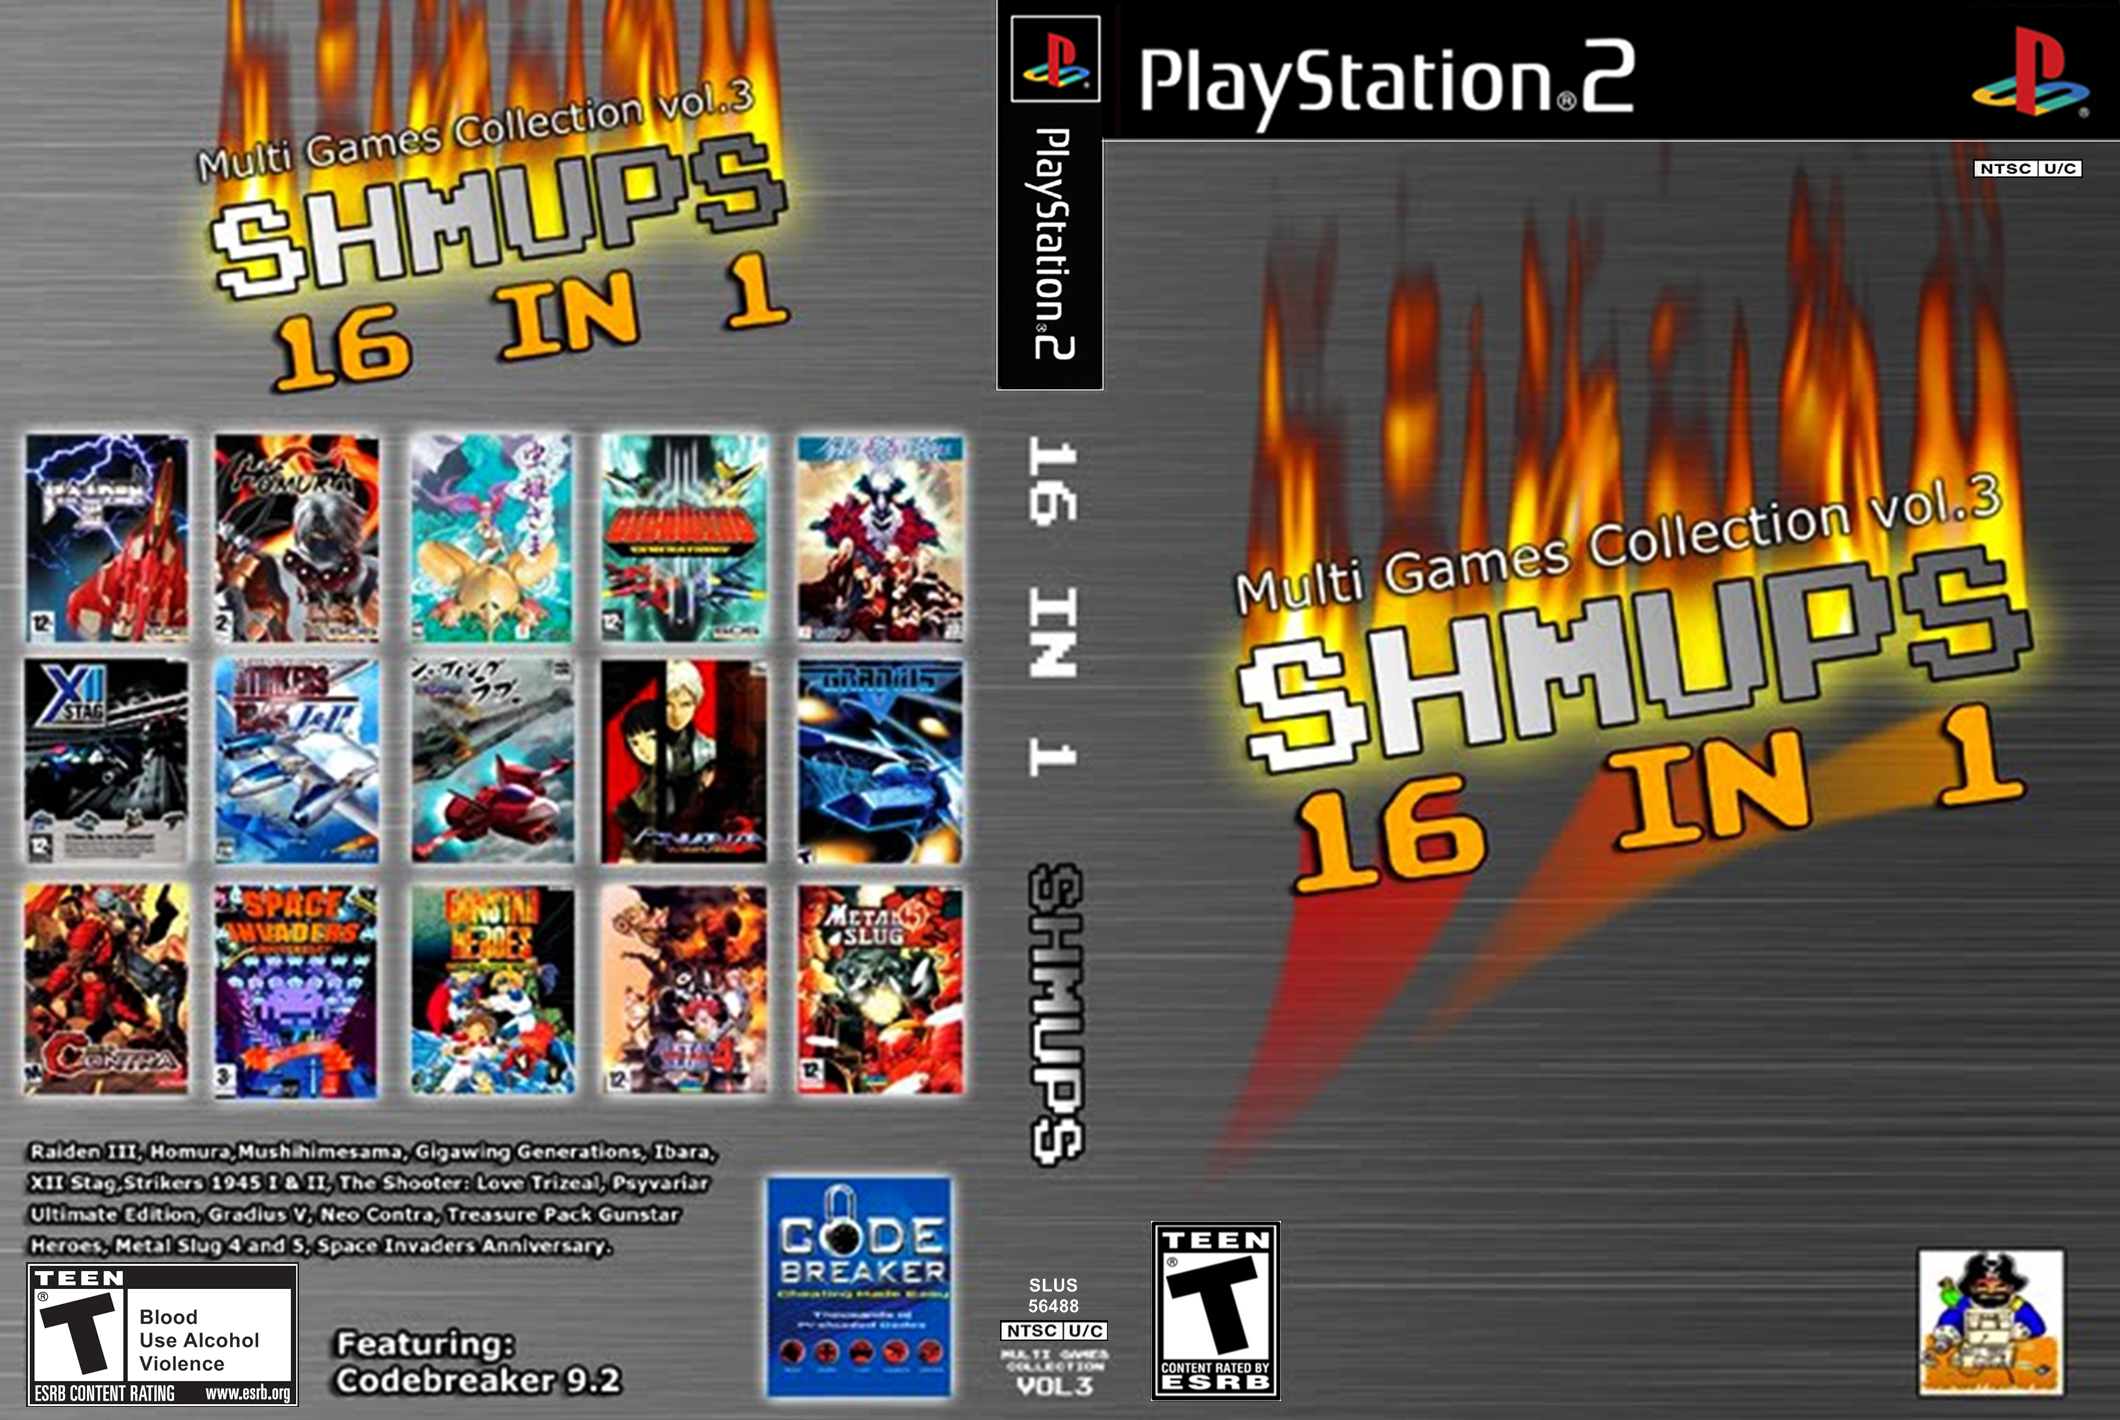 Игры на эмулятор сони 1. Ps2 PLAYSTATION 2. Ps1 Strikers 1945 2 диск. Диск ps2 Sony PLAYSTATION 2. PLAYSTATION 2 ICO обложка диска.